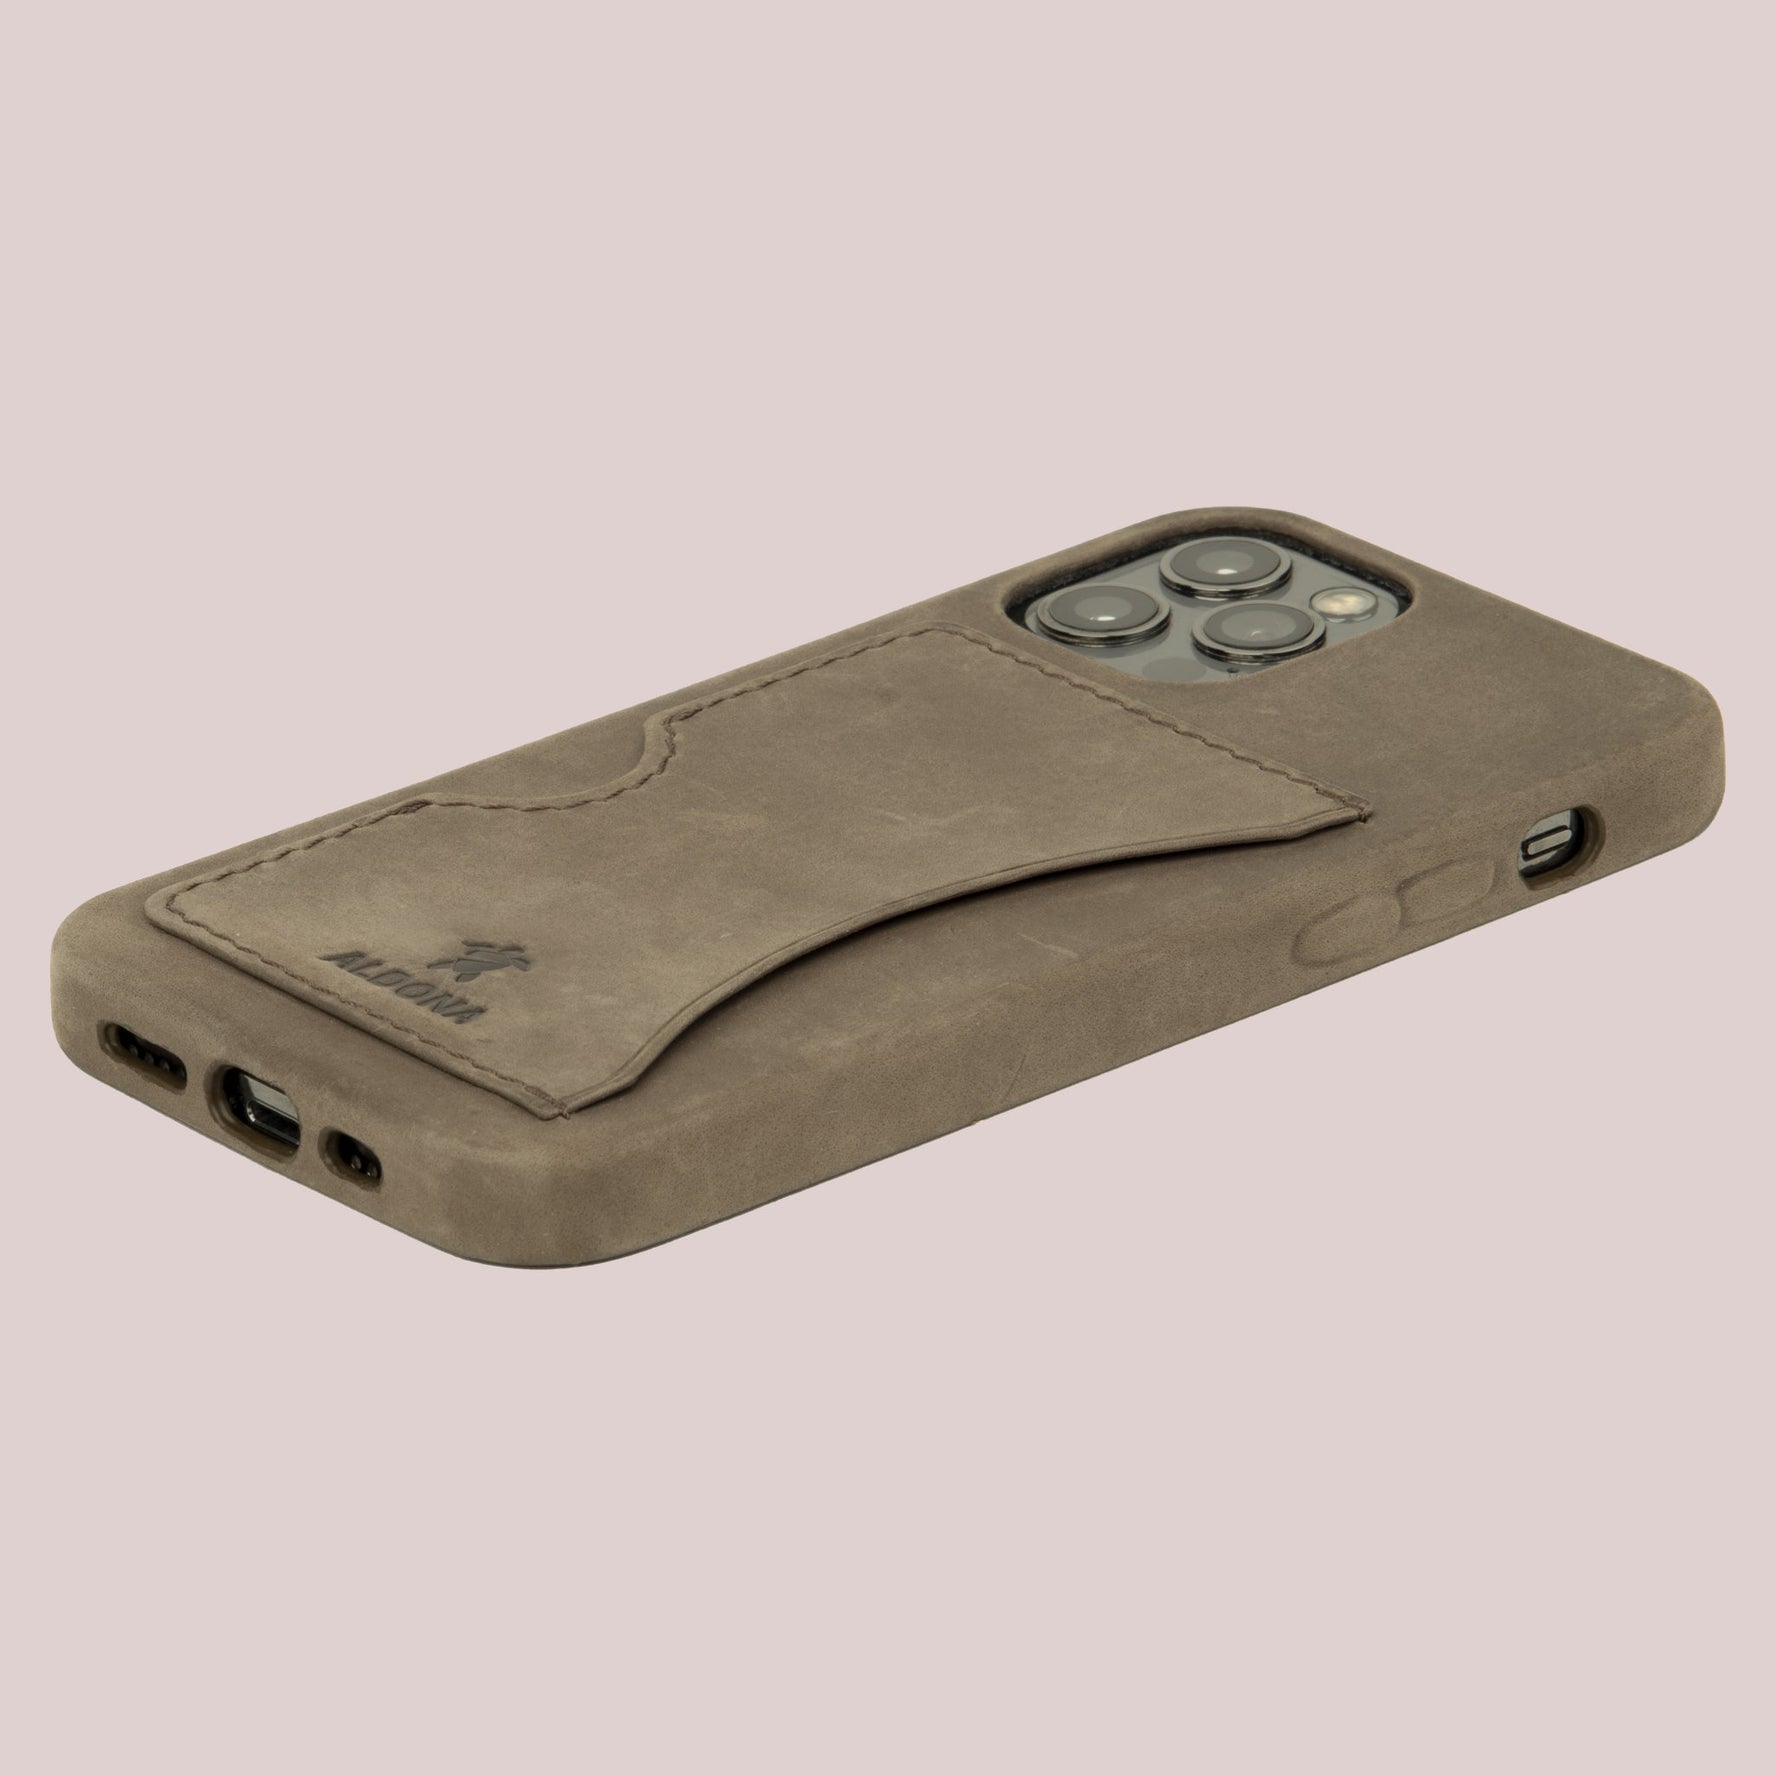 Baxter Card Case for iPhone 13 series - Burnt Tobacco